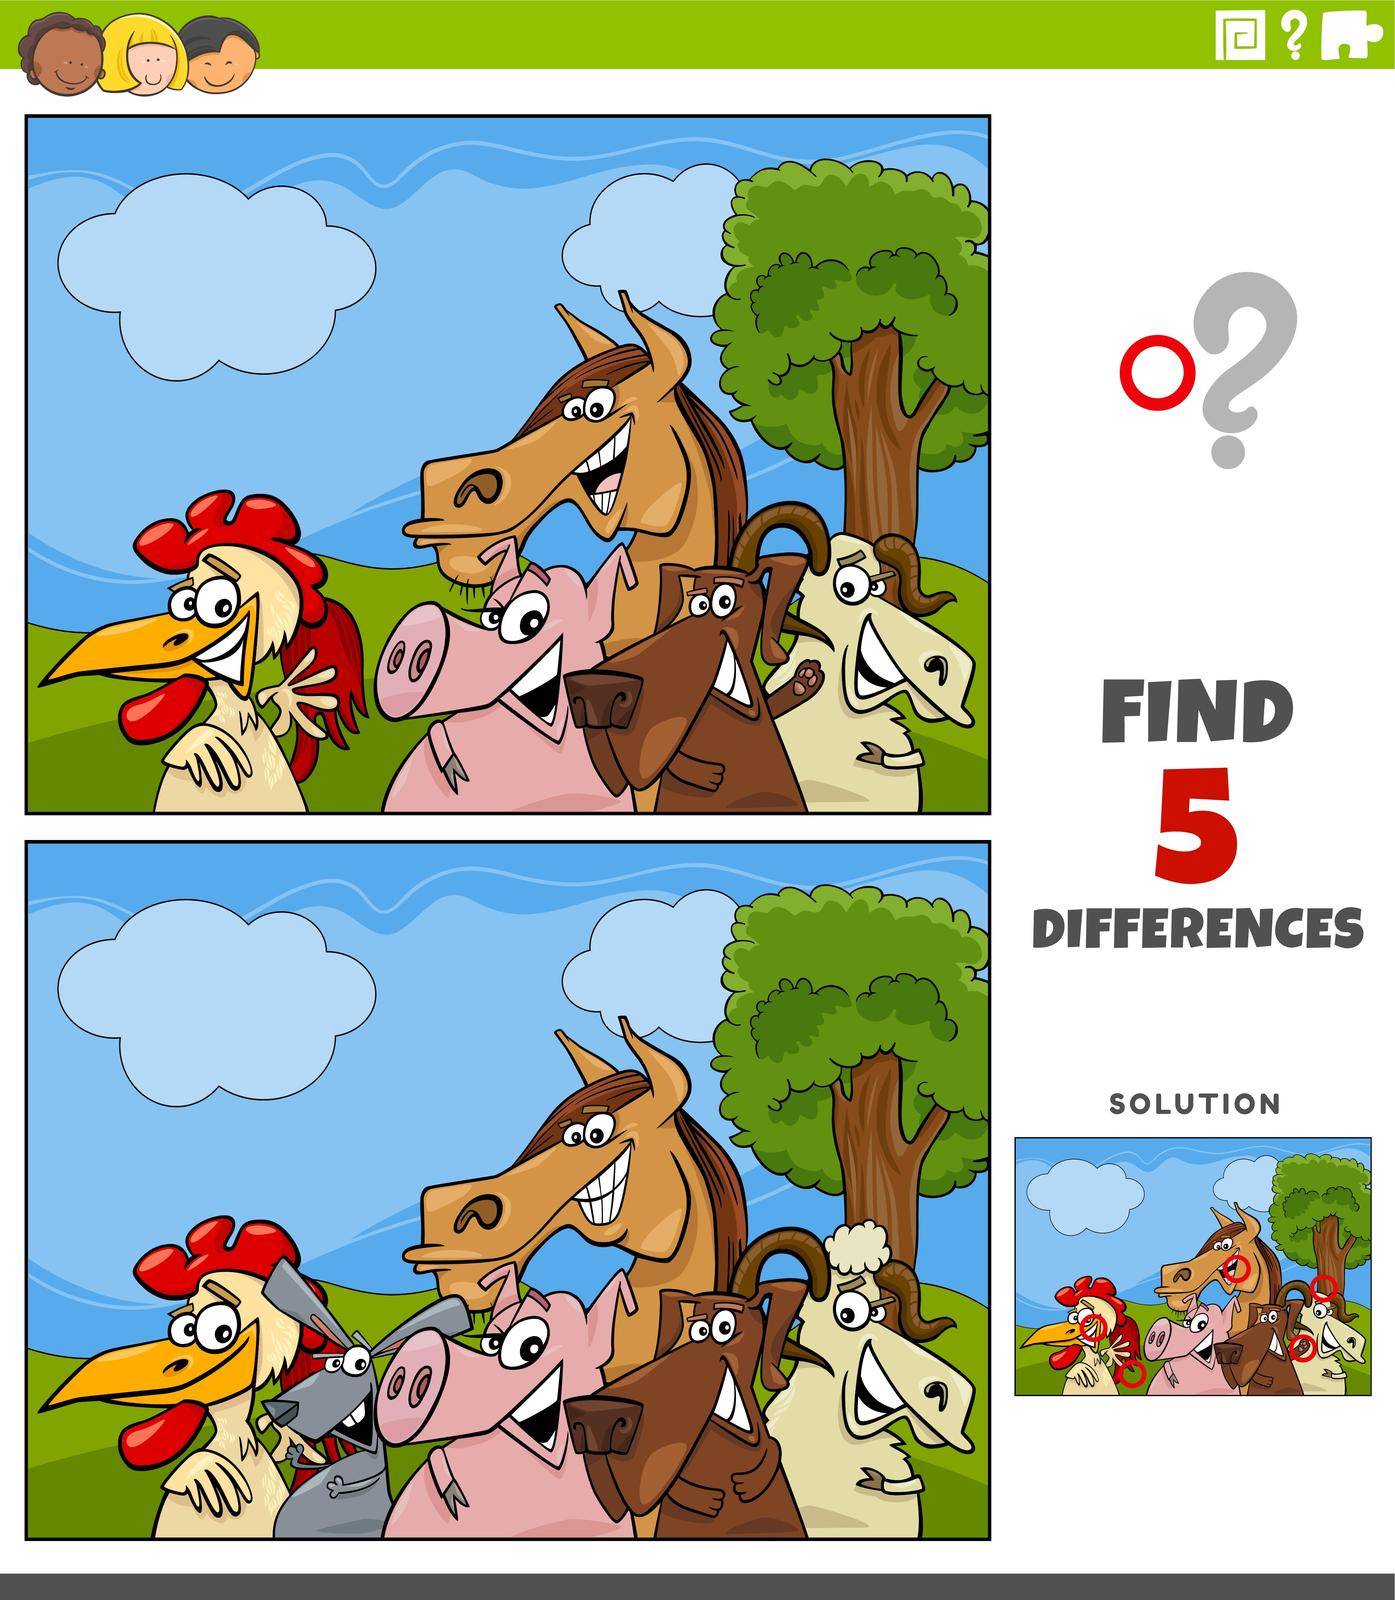 Cartoon illustration of finding the differences between pictures educational game for kids with farm animal characters